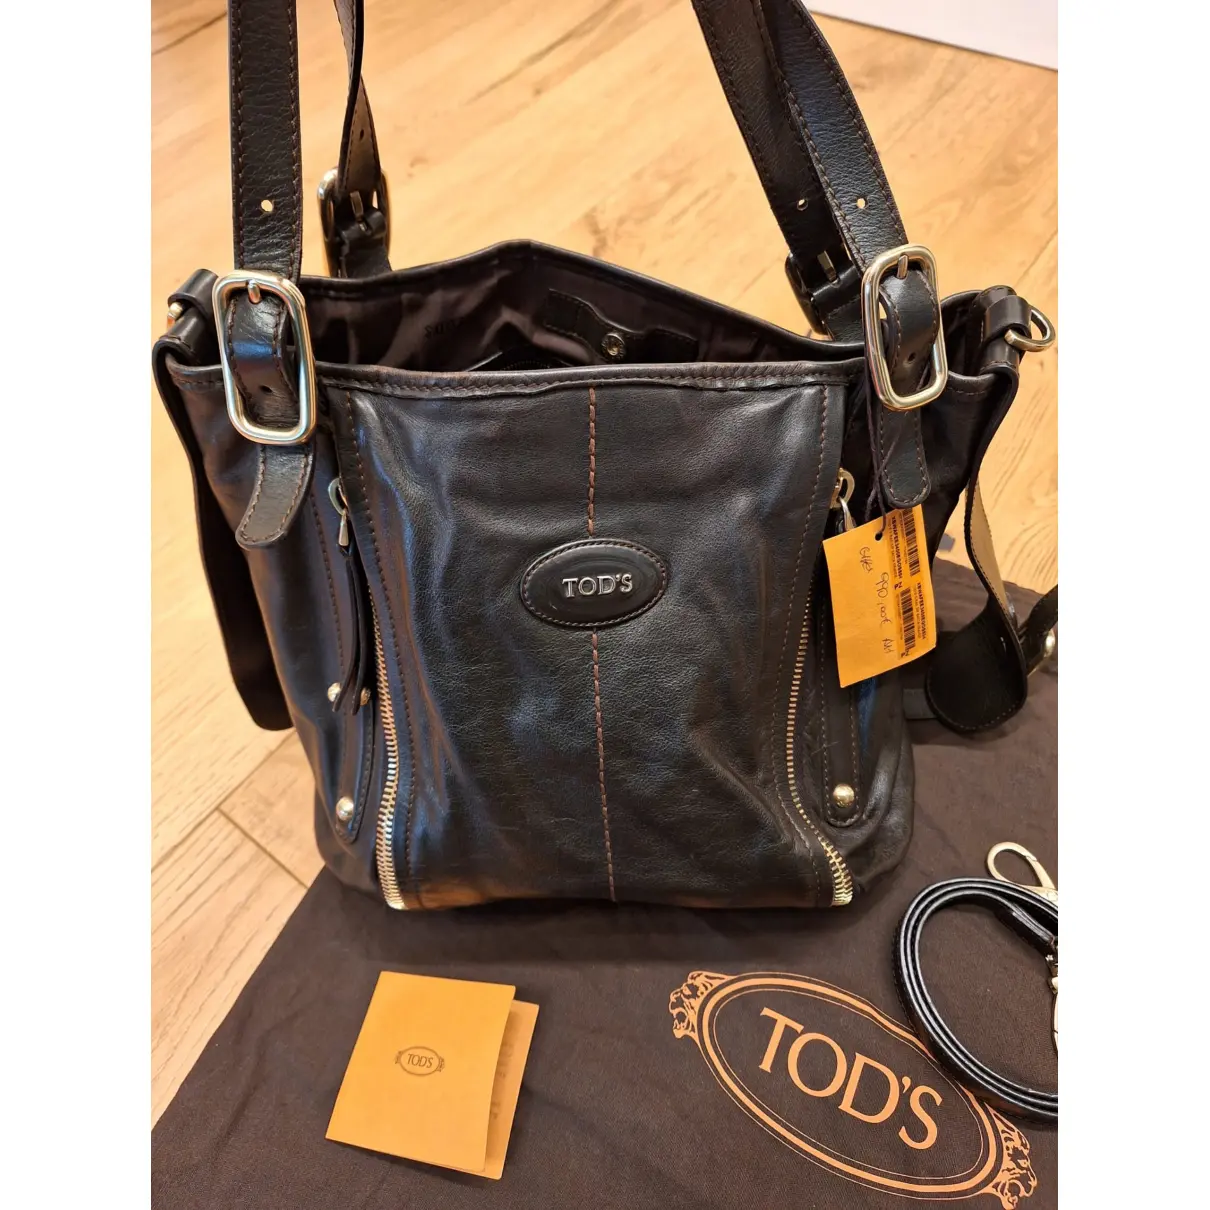 Buy Tod's Shopping Media leather tote online